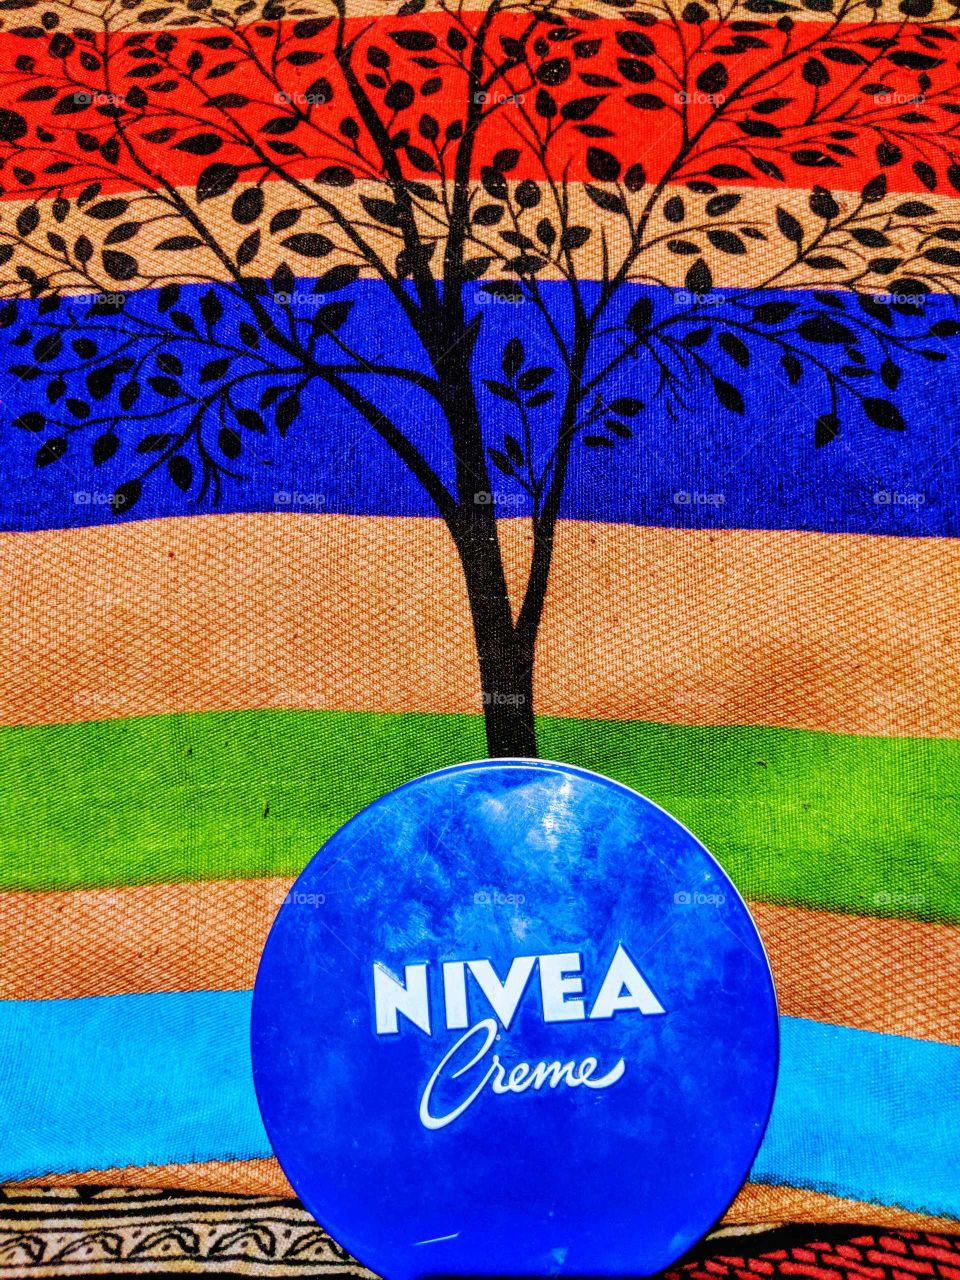 Share Your Spring With NIVEA